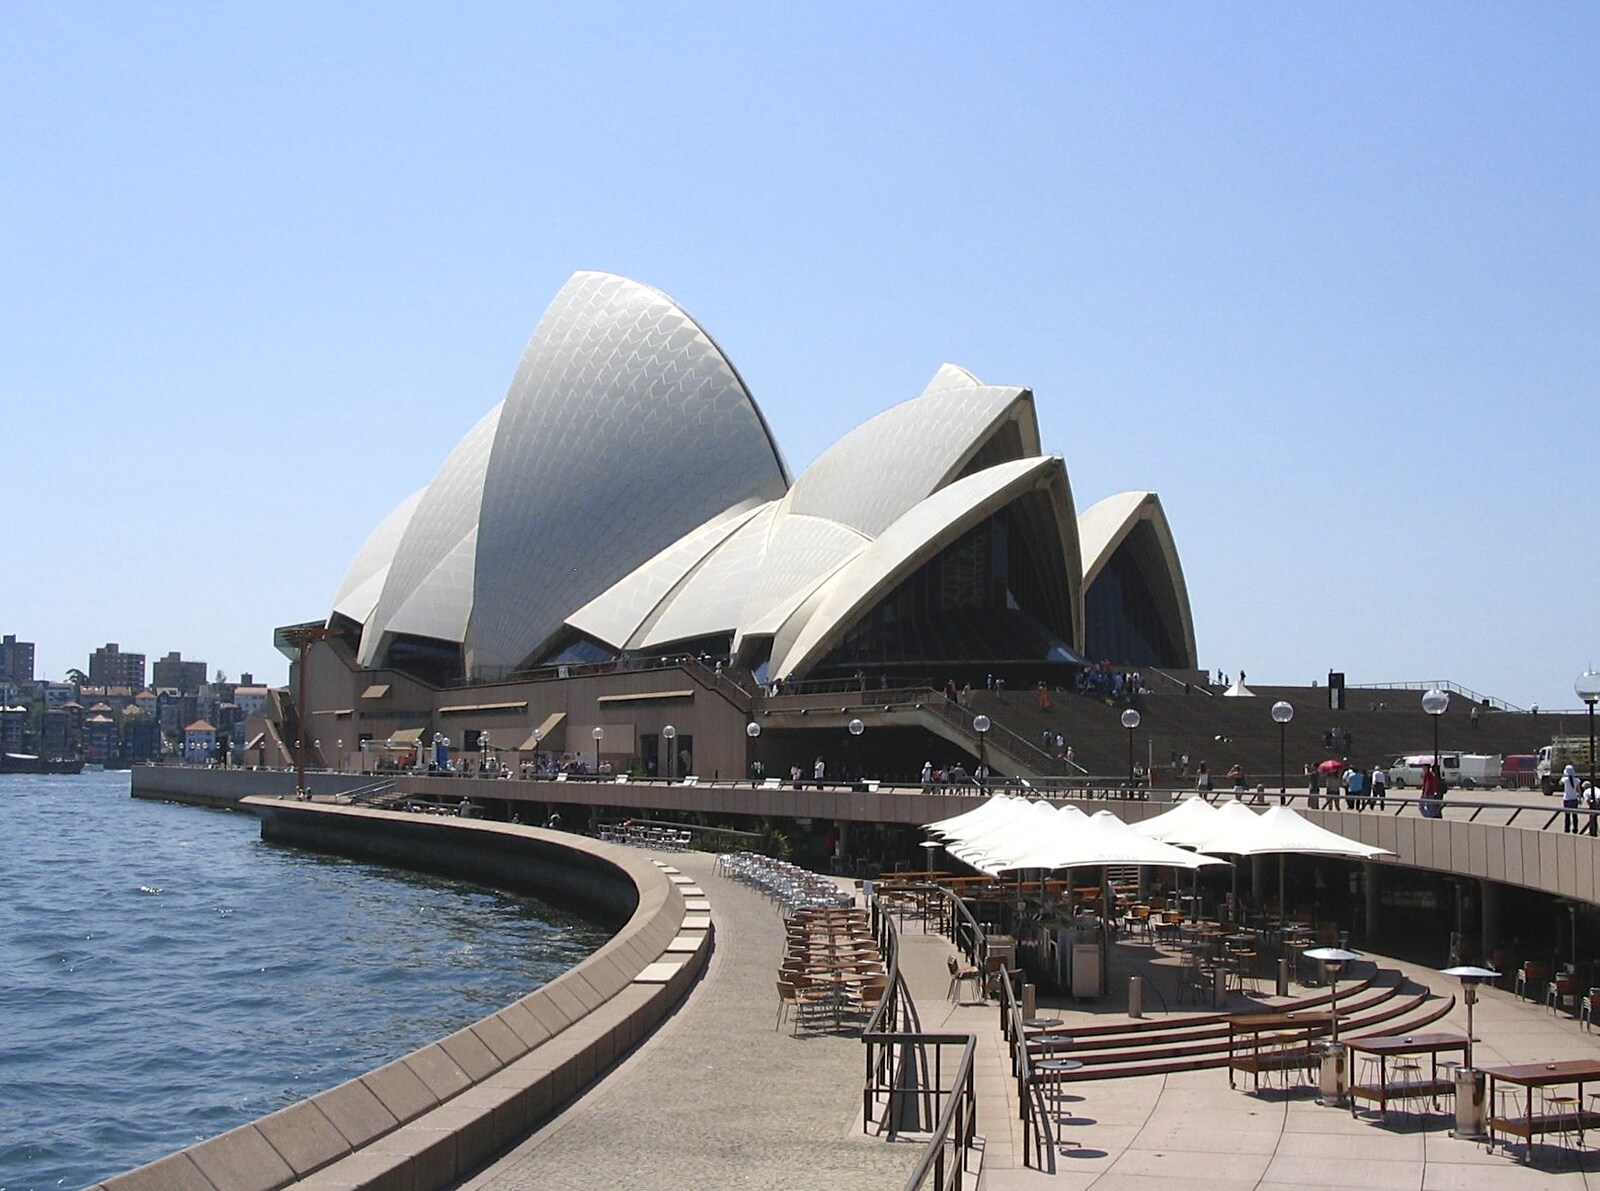 The Opera House from Sydney, New South Wales, Australia - 10th October 2004